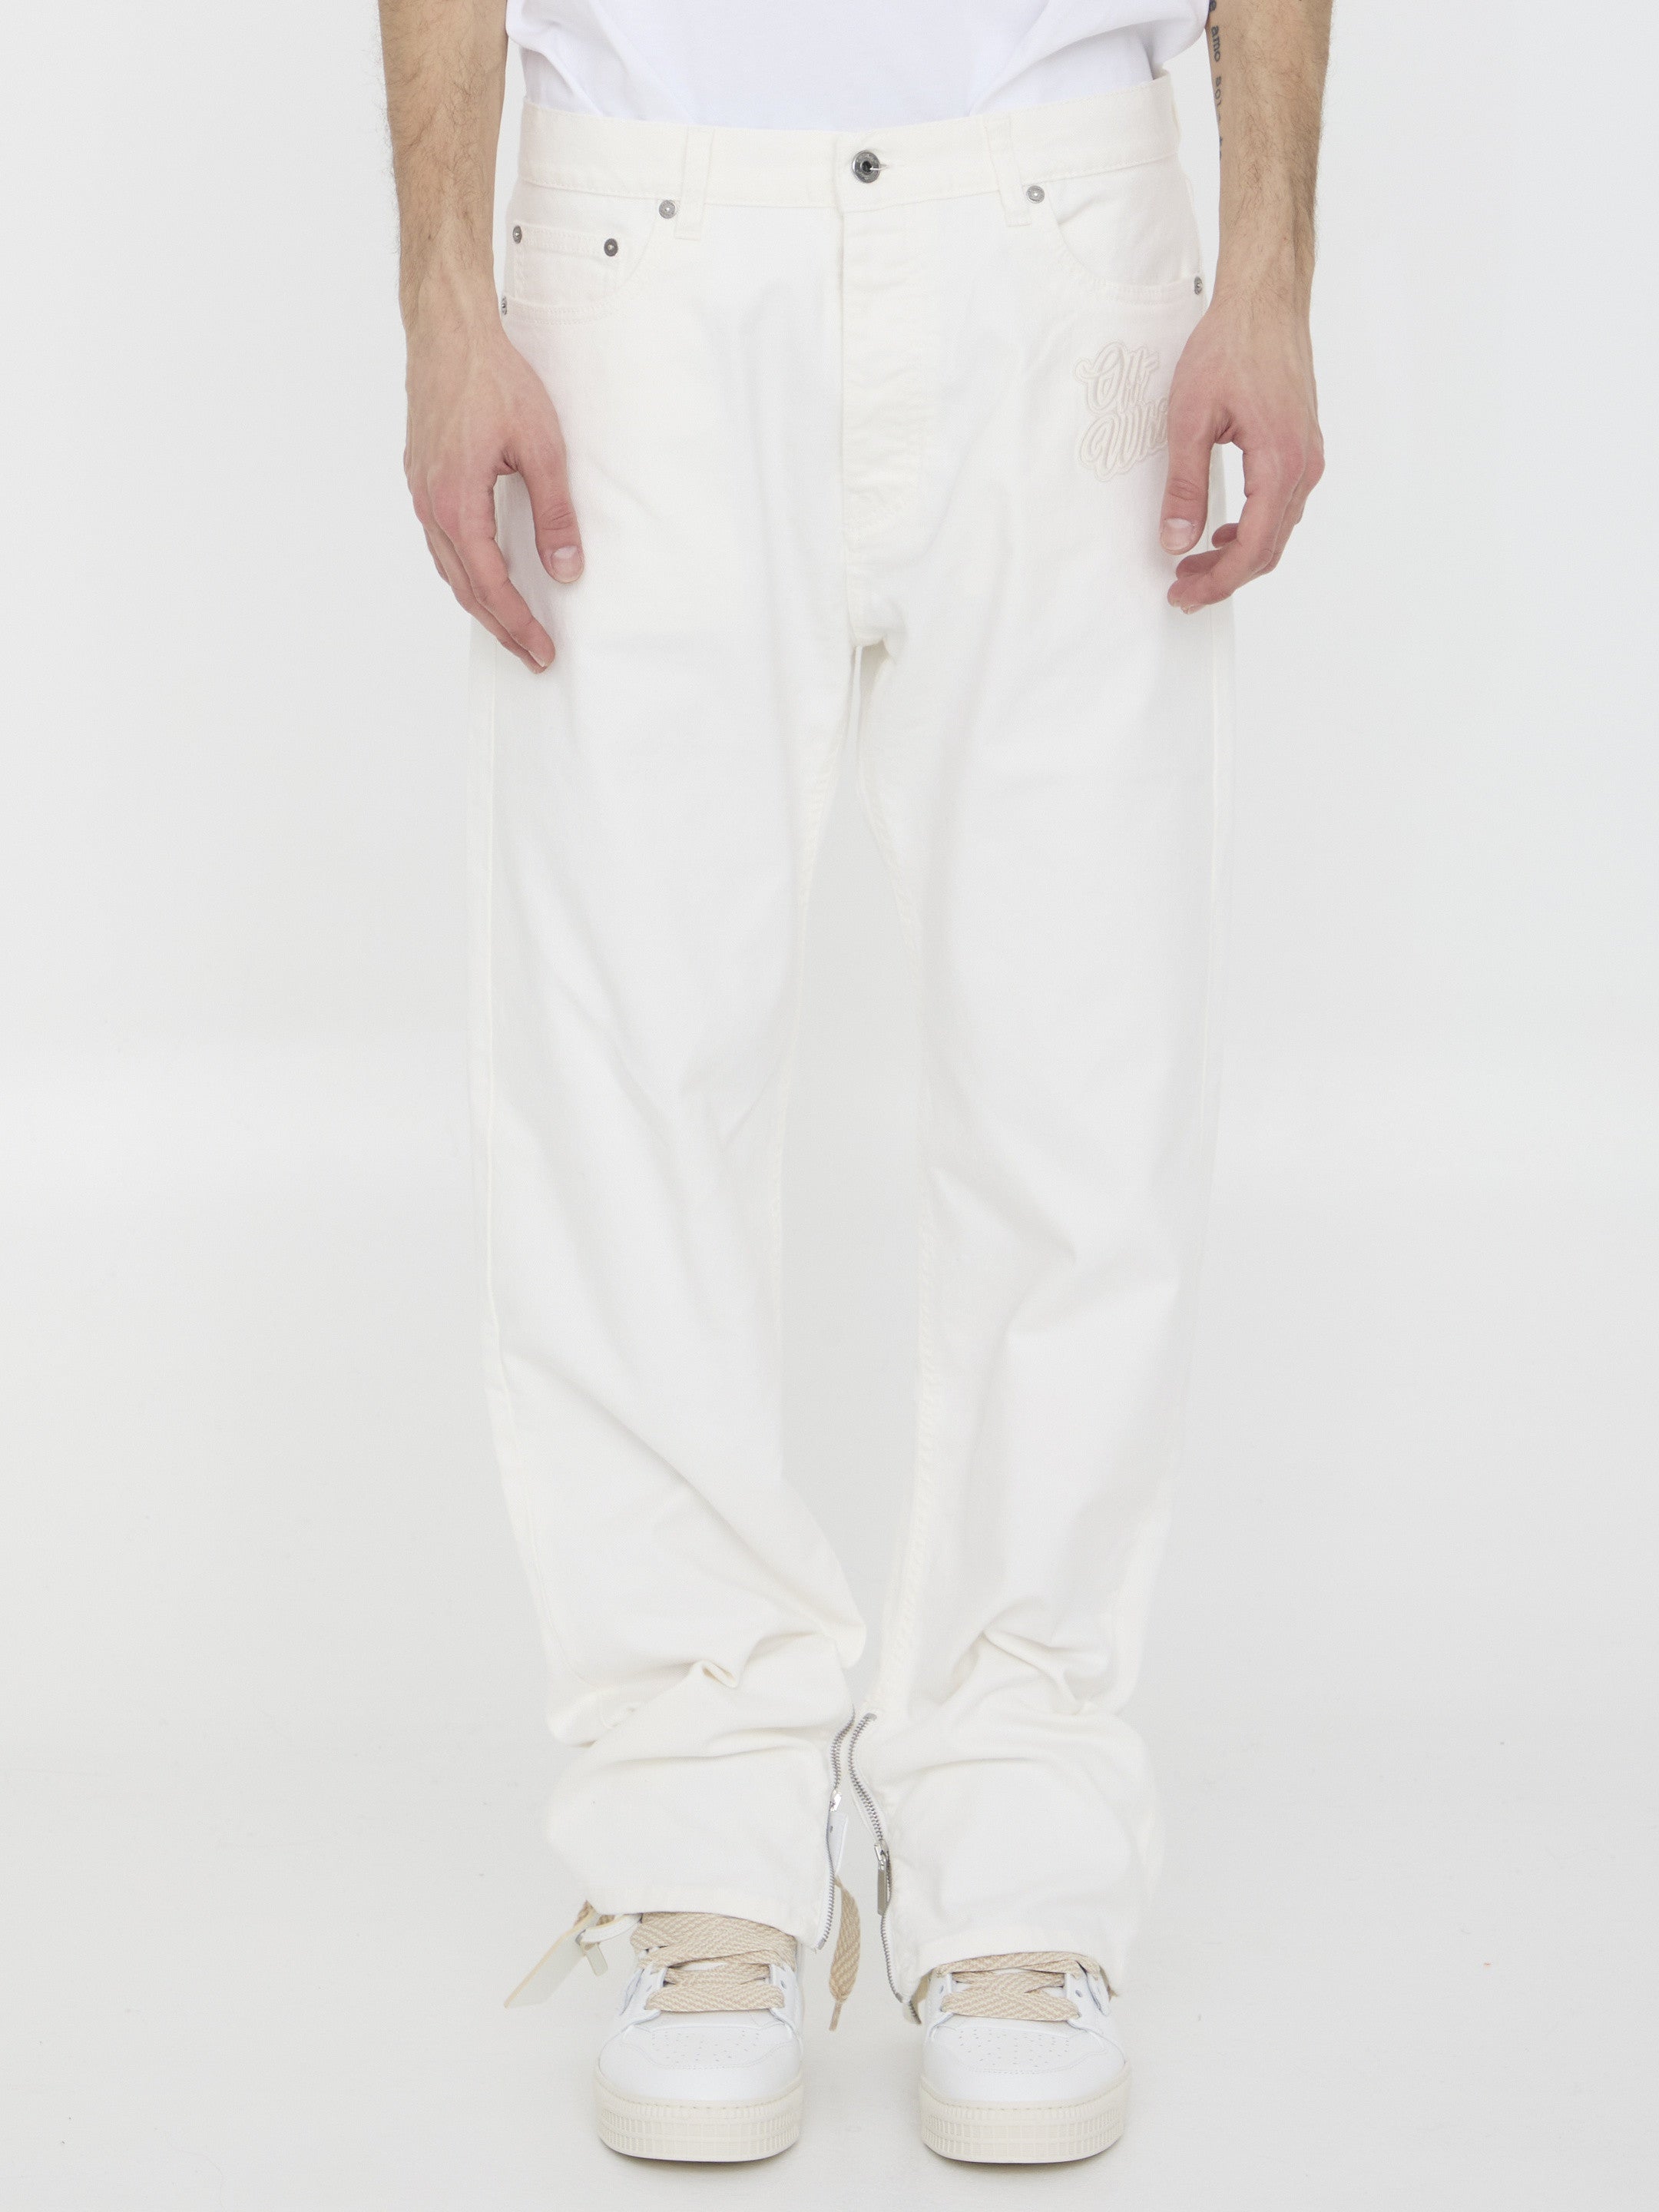 OFF-WHITE-OUTLET-SALE-90s-Logo-jeans-Jeans-30-WHITE-ARCHIVE-COLLECTION.jpg